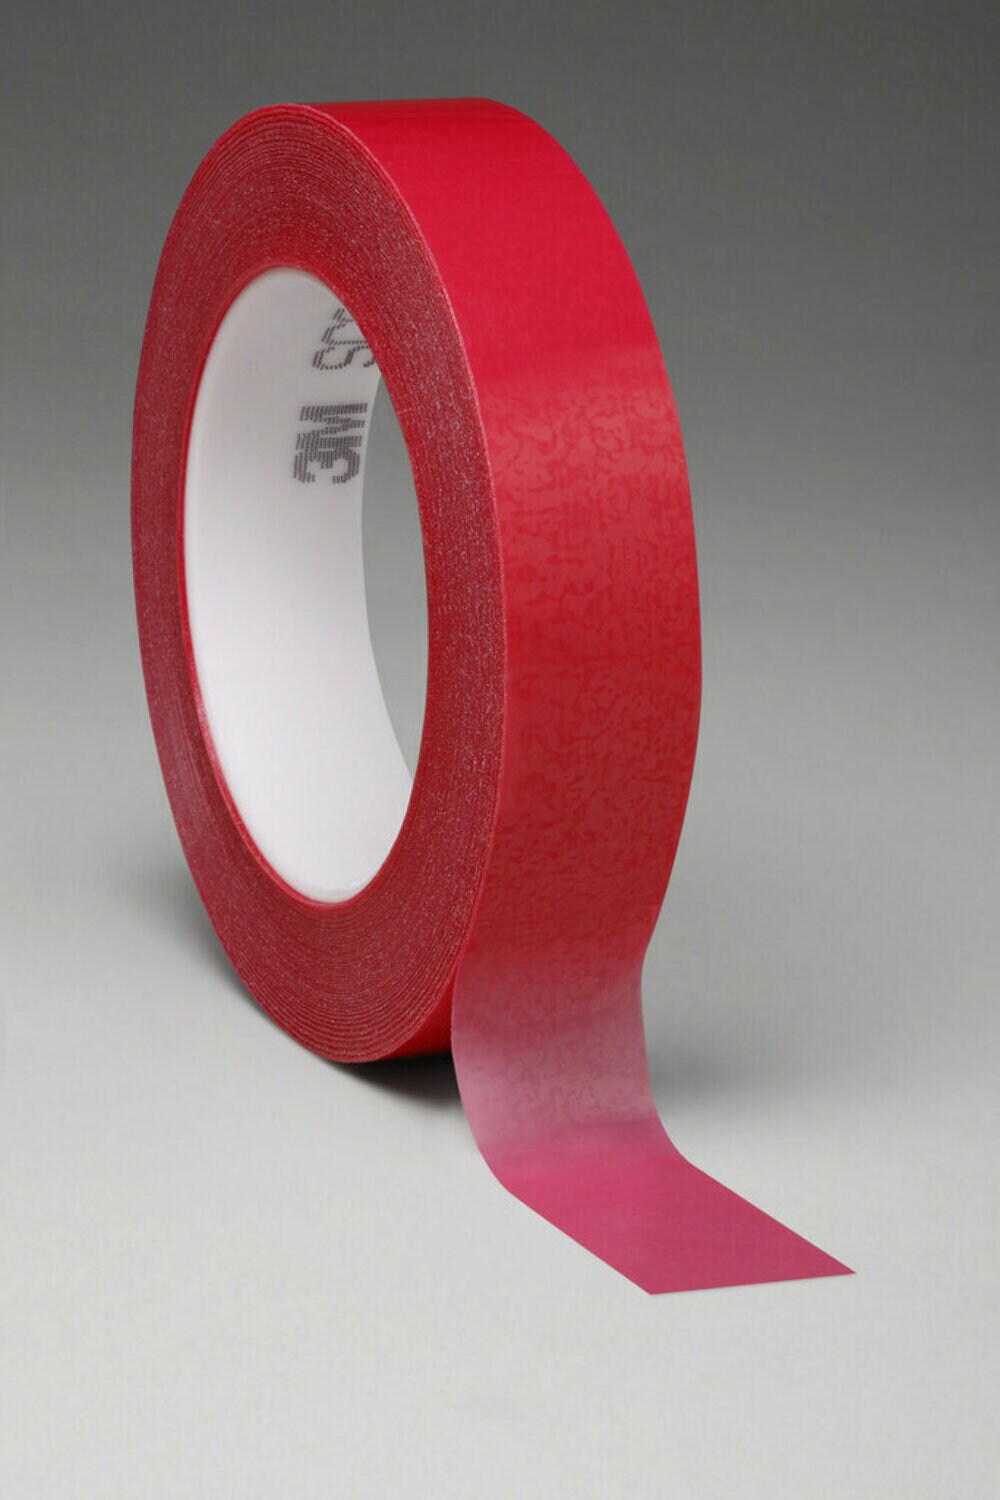 7000048773 - 3M Circuit Plating Tape 1280 Red, 12 in x 72 yds x 4.2 mil, 4 Roll/Case, Bulk